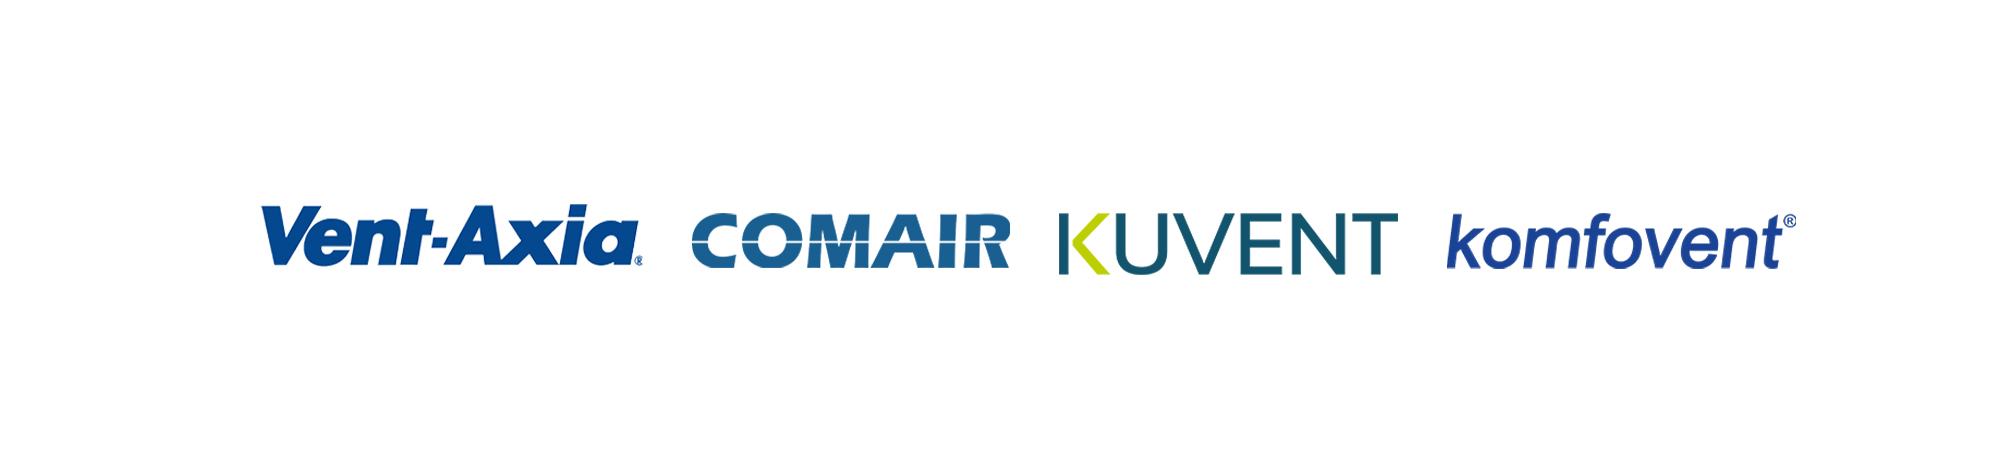 Komfovent, Vent-Axia, Comair & Kuvent